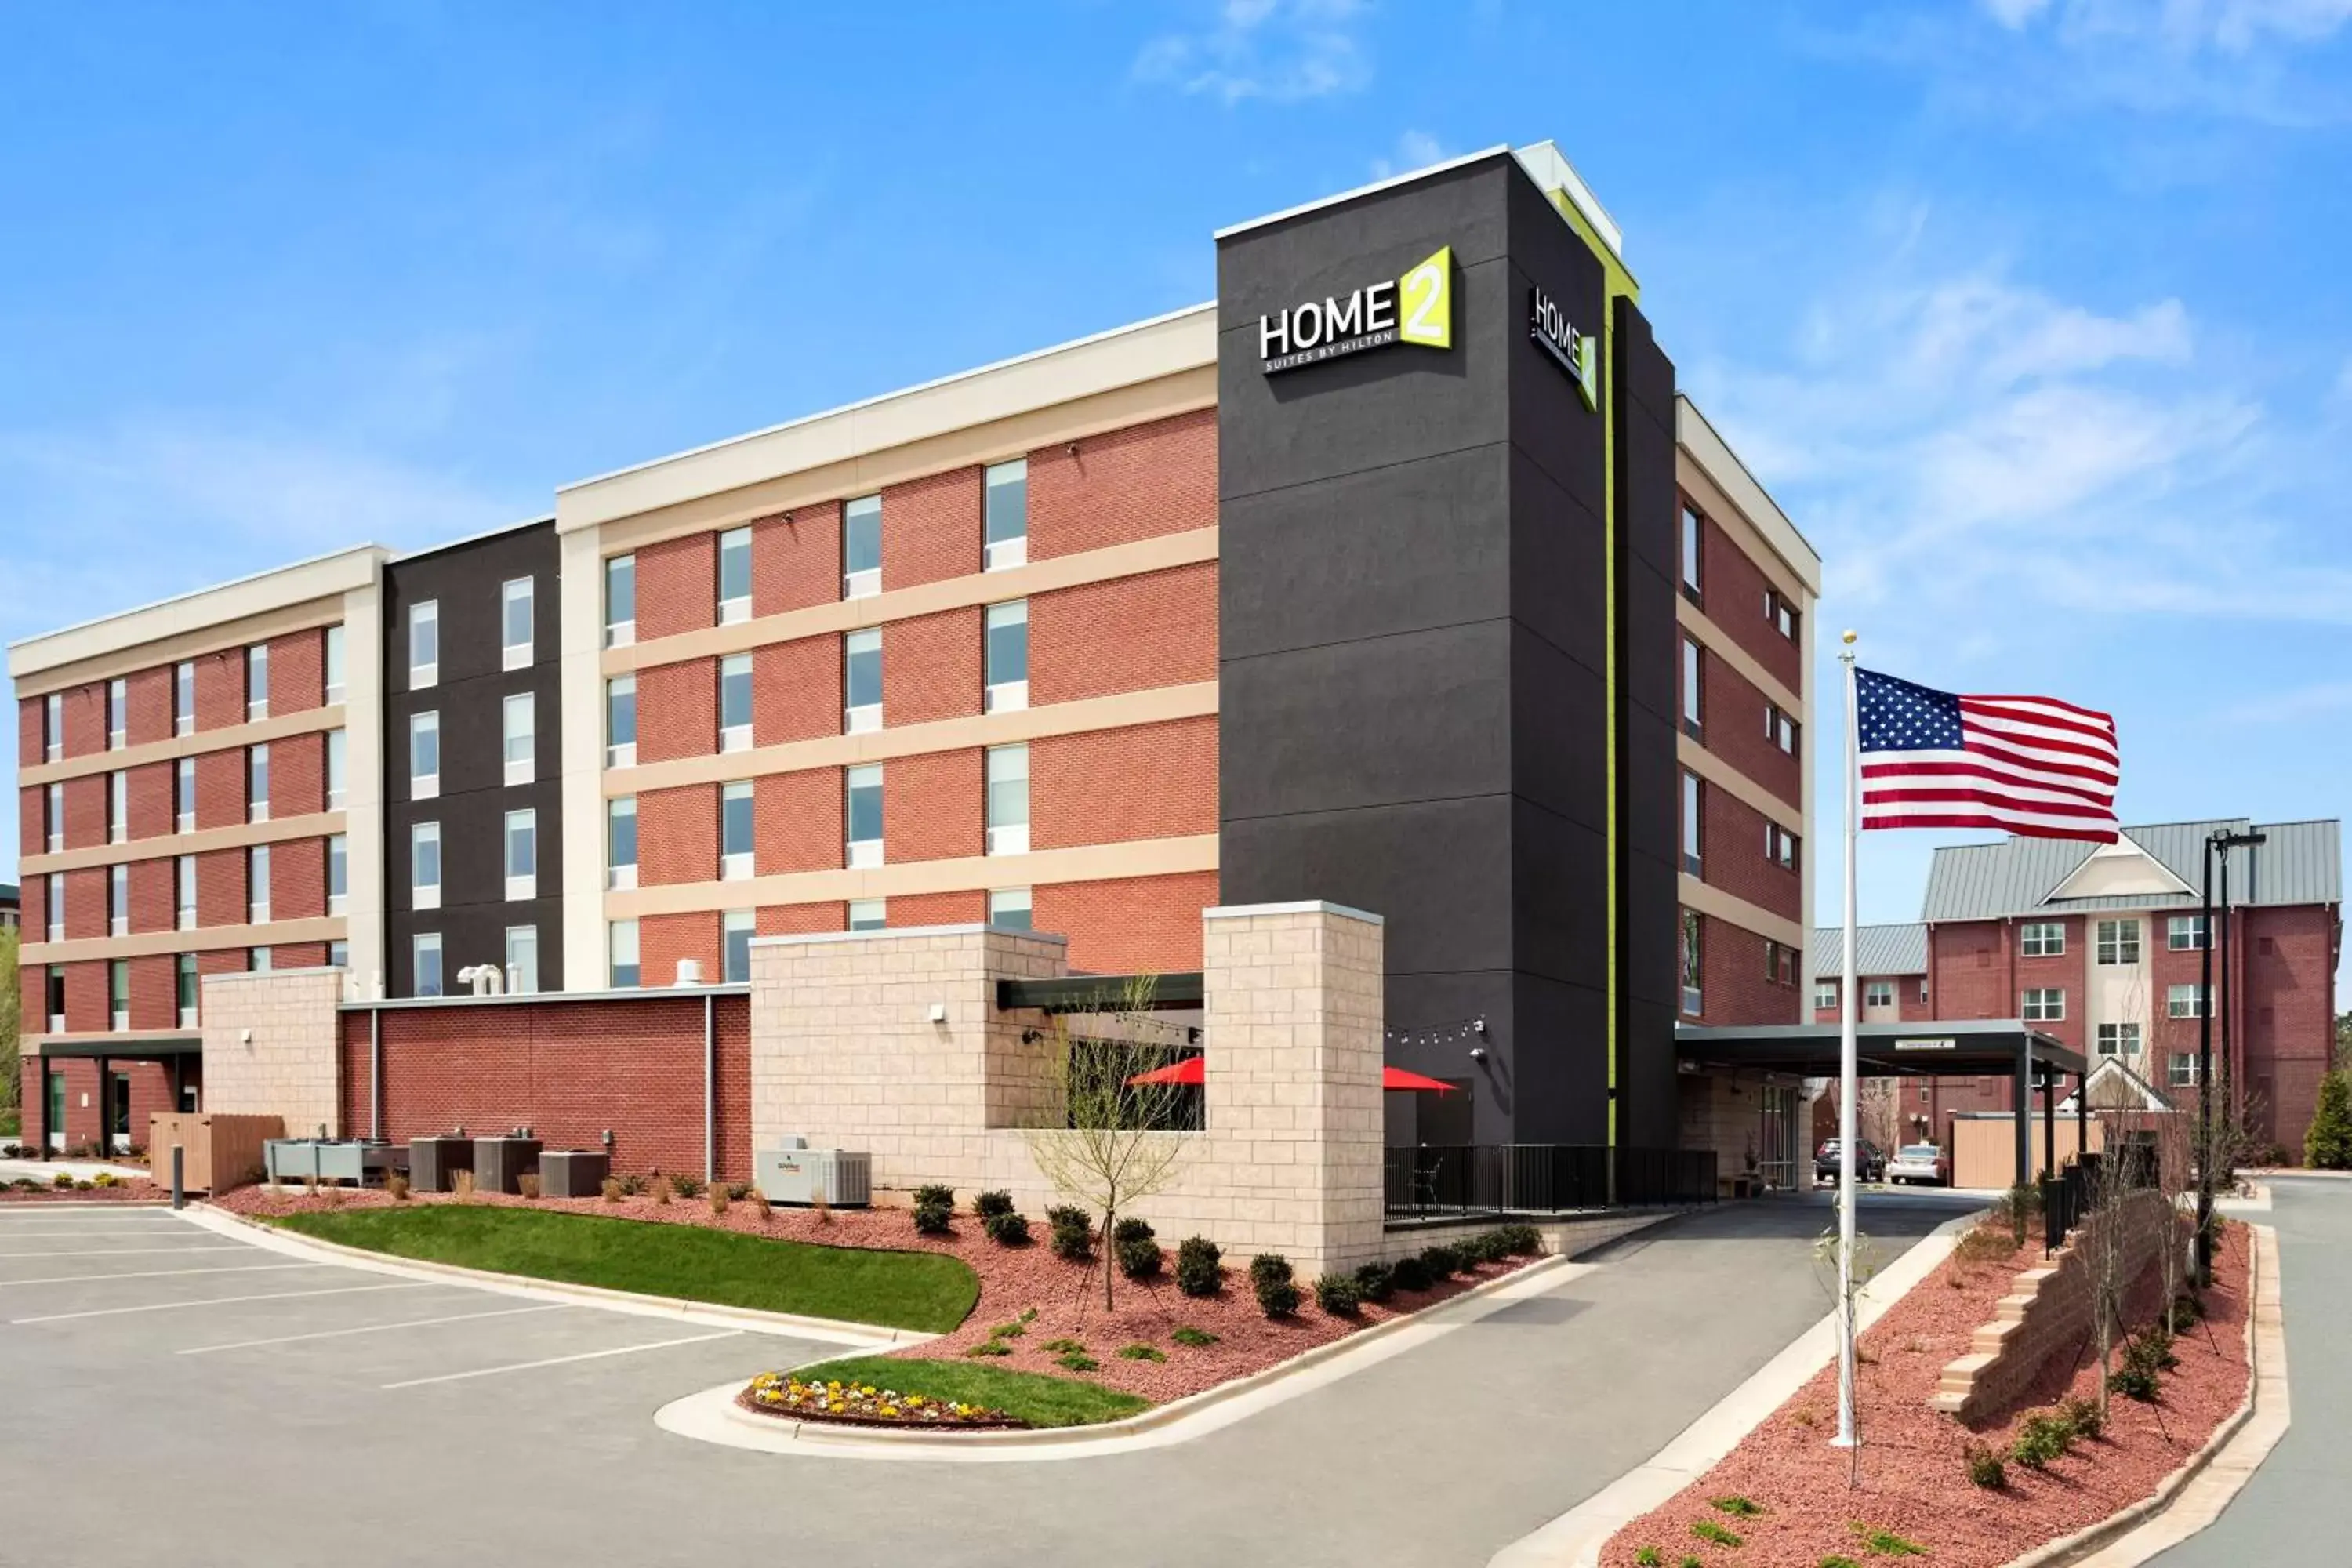 Property Building in Home2 Suites by Hilton Greensboro Airport